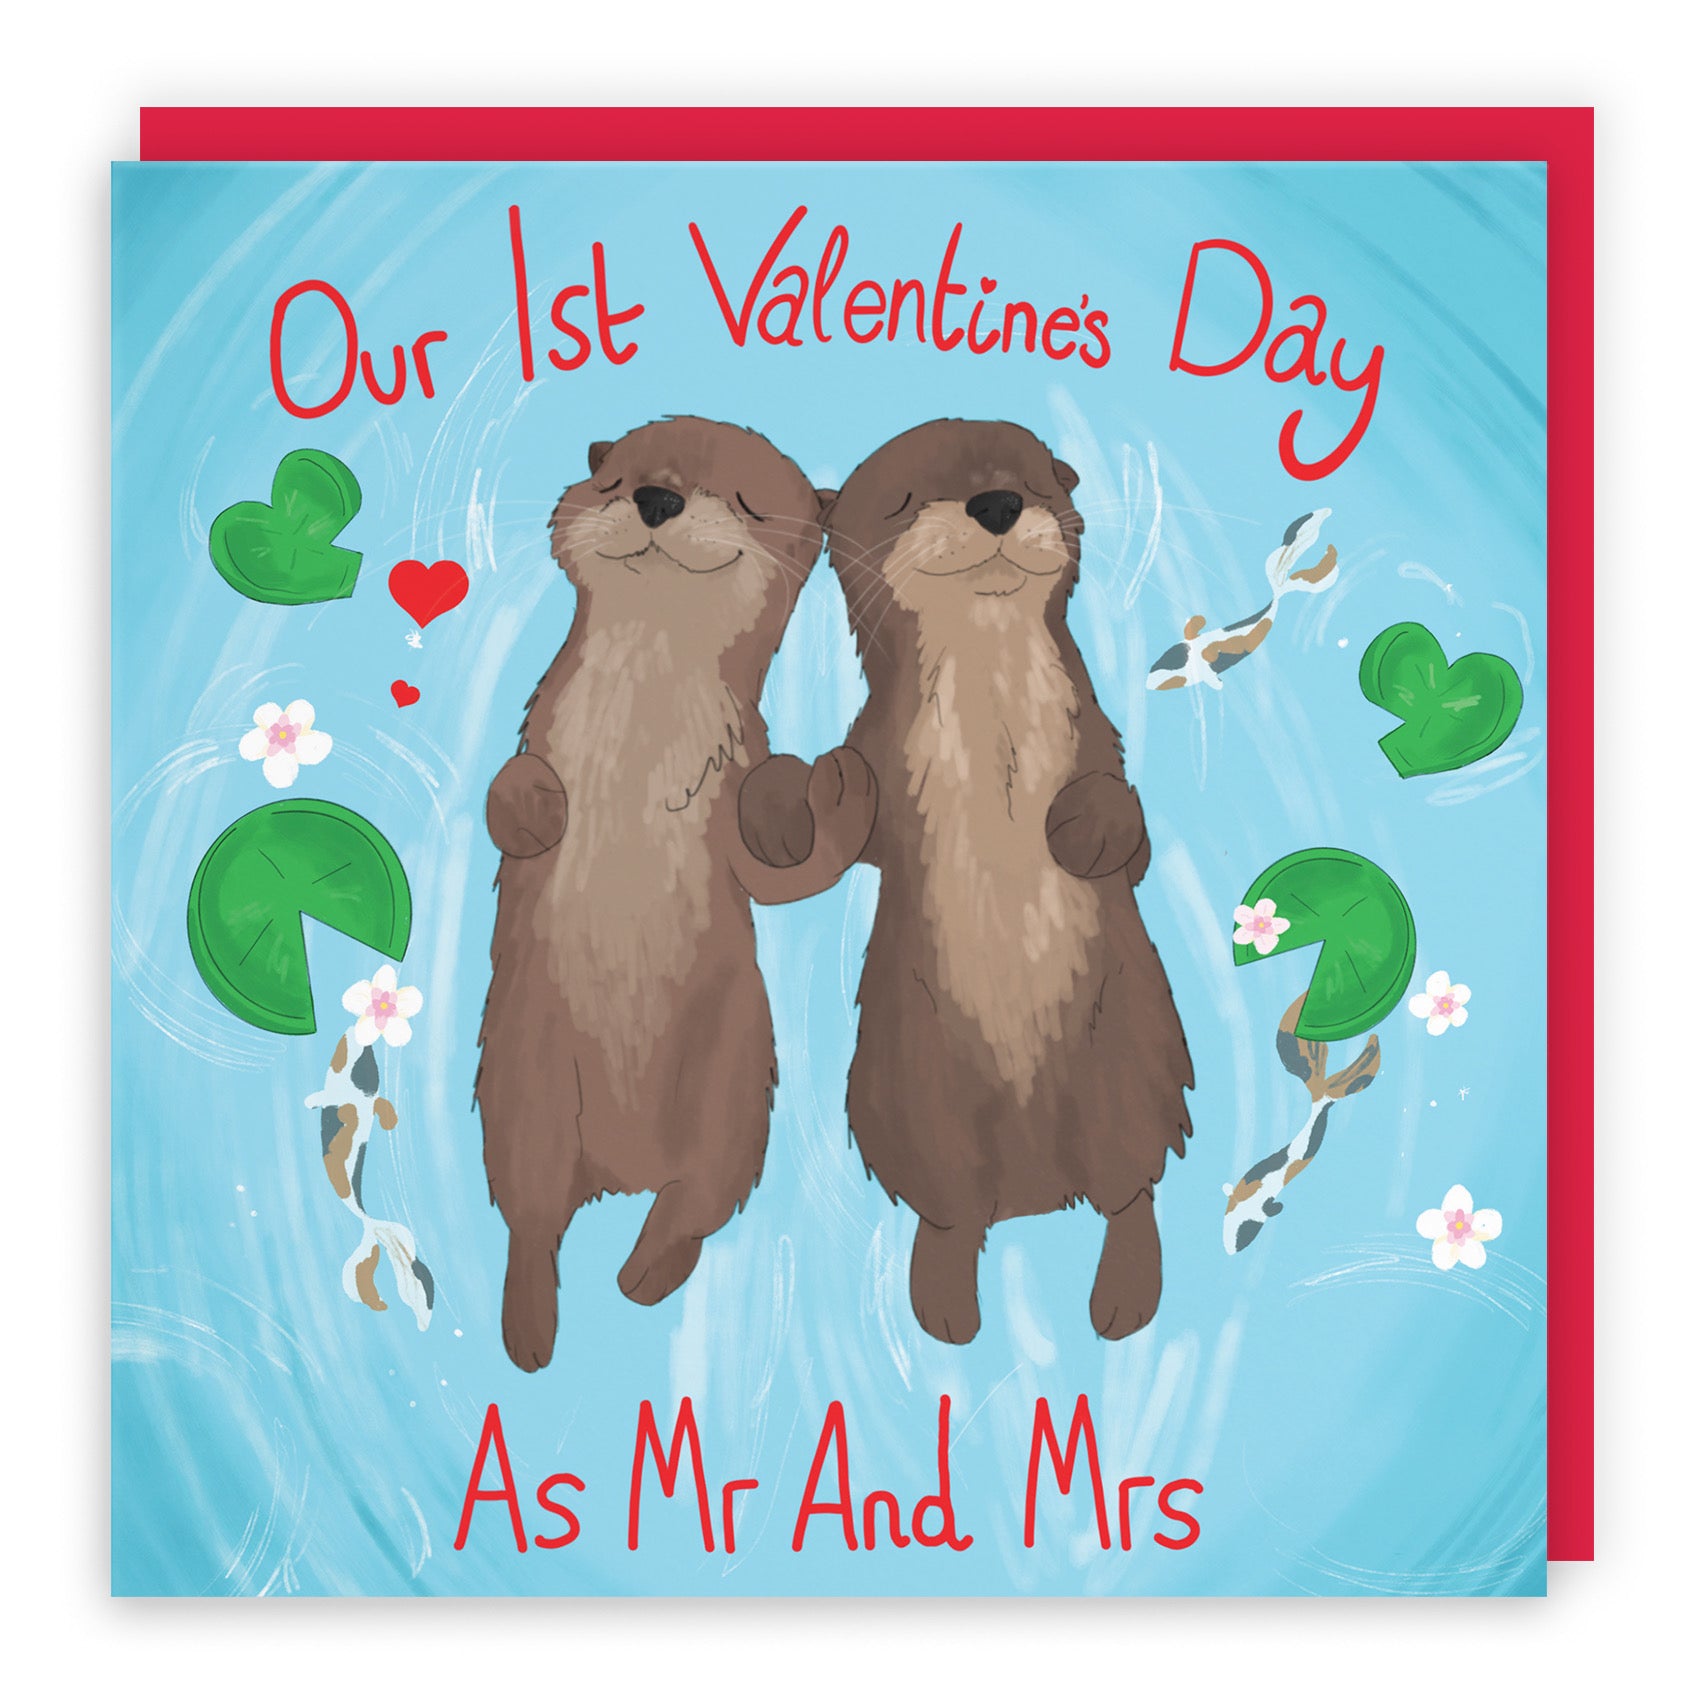 Otters 1st Married Valentine's Day Card Cute Animals - Default Title (B09R6L3VN8)